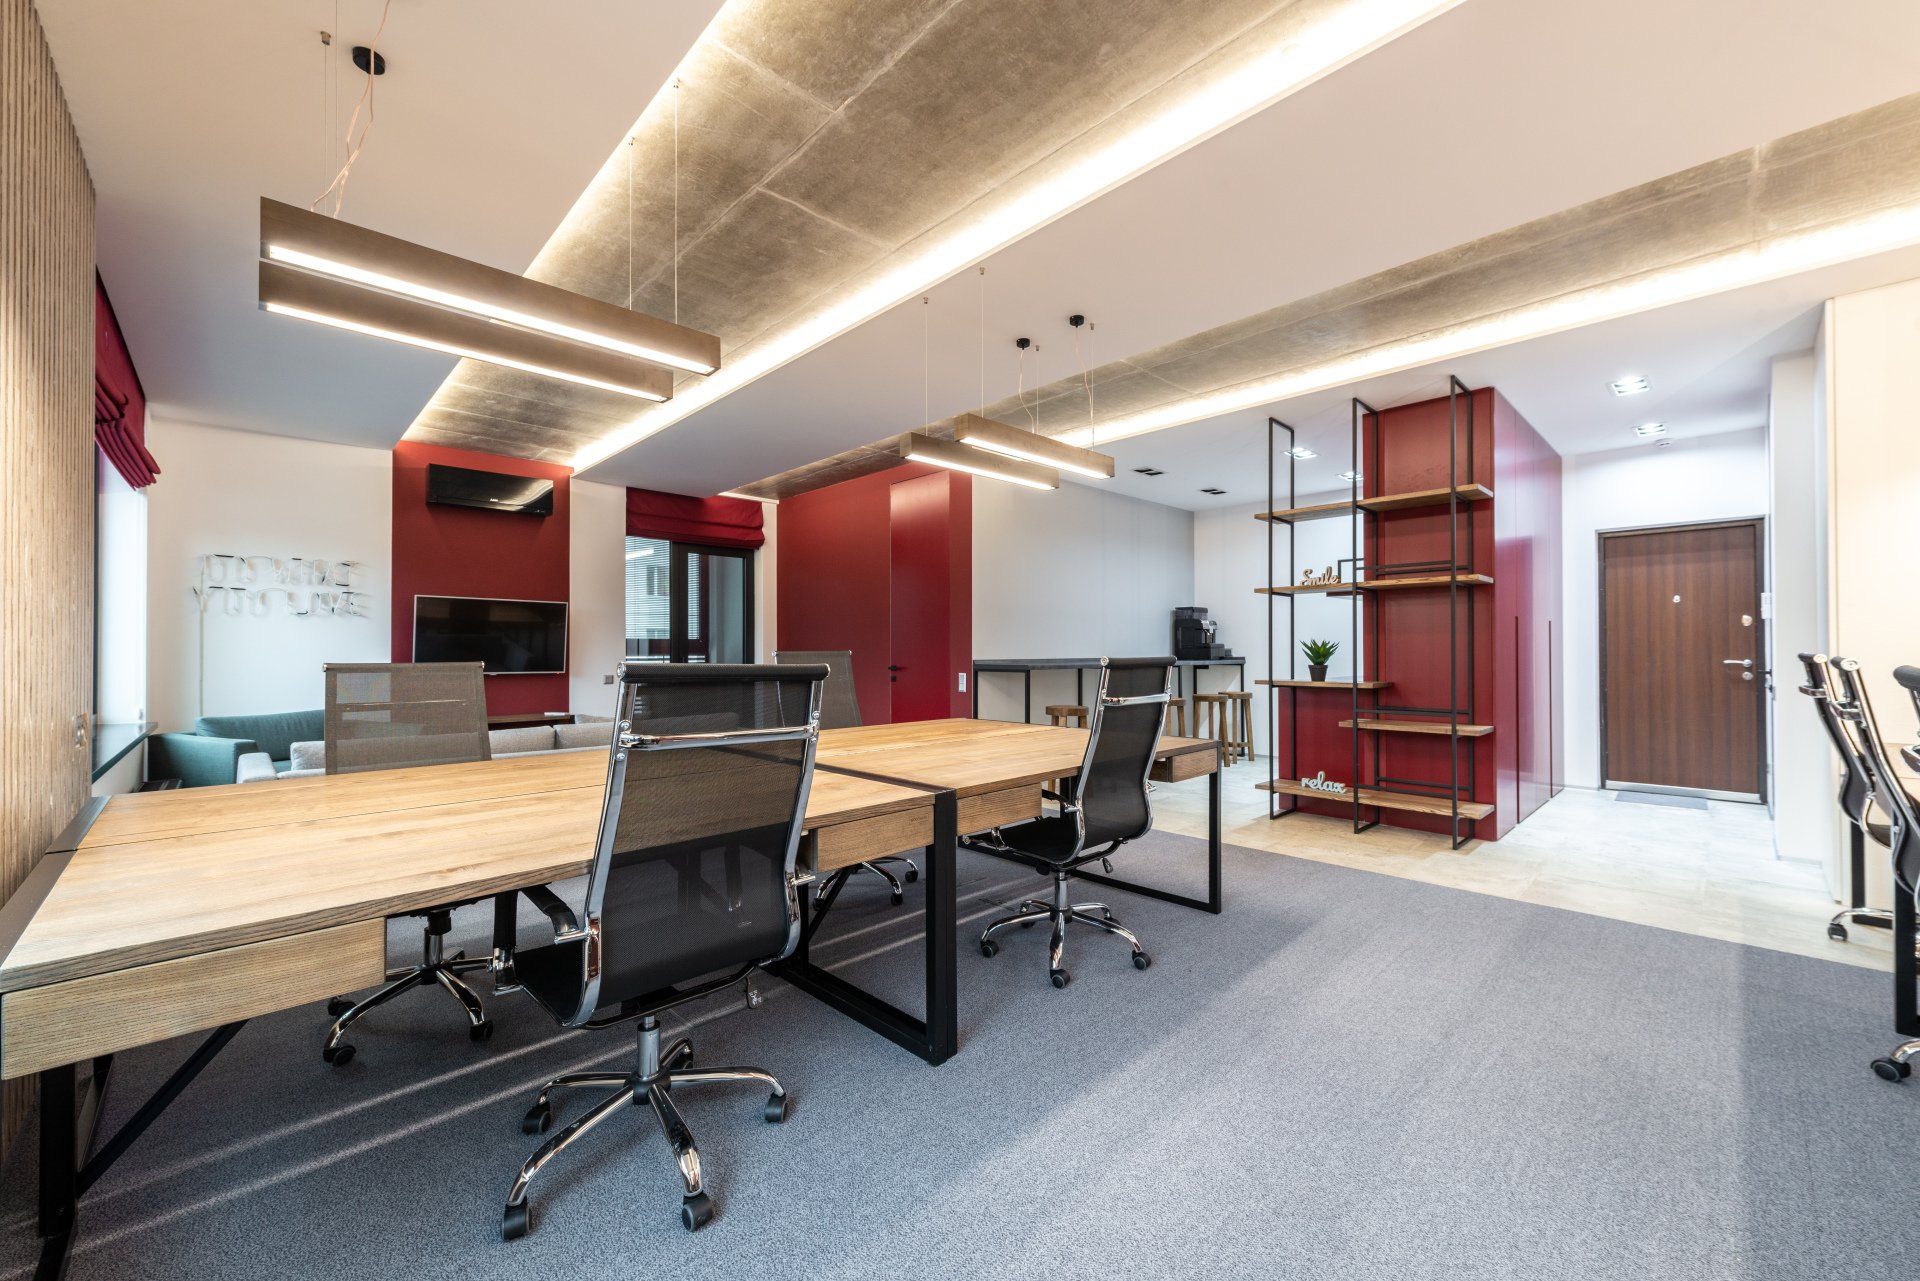 officeperfectly renovated conference room with hung t bar ceiling